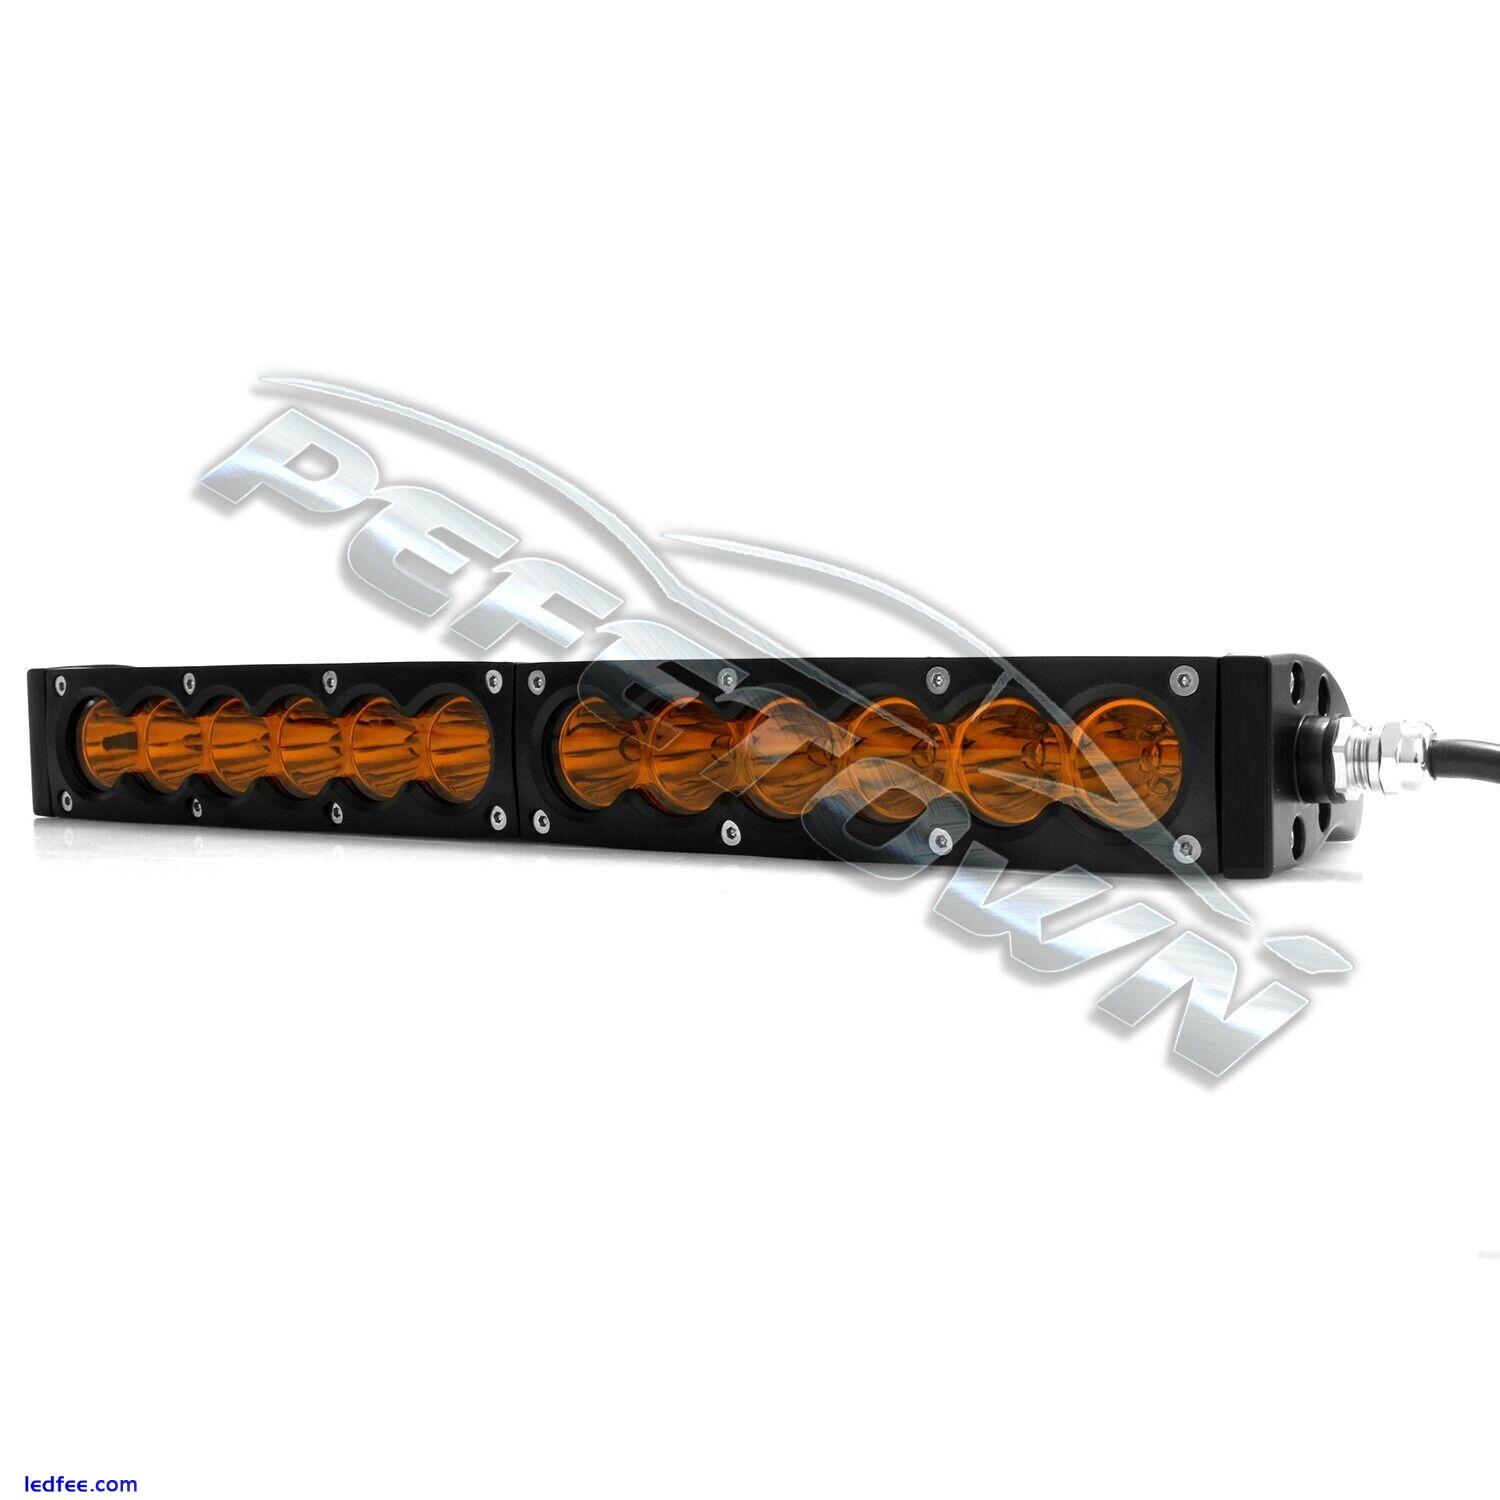 13Inch LED Work Light Bar Spot Offroad Boat SUV 4WD Truck Fog Driving Lamp Amber 4 